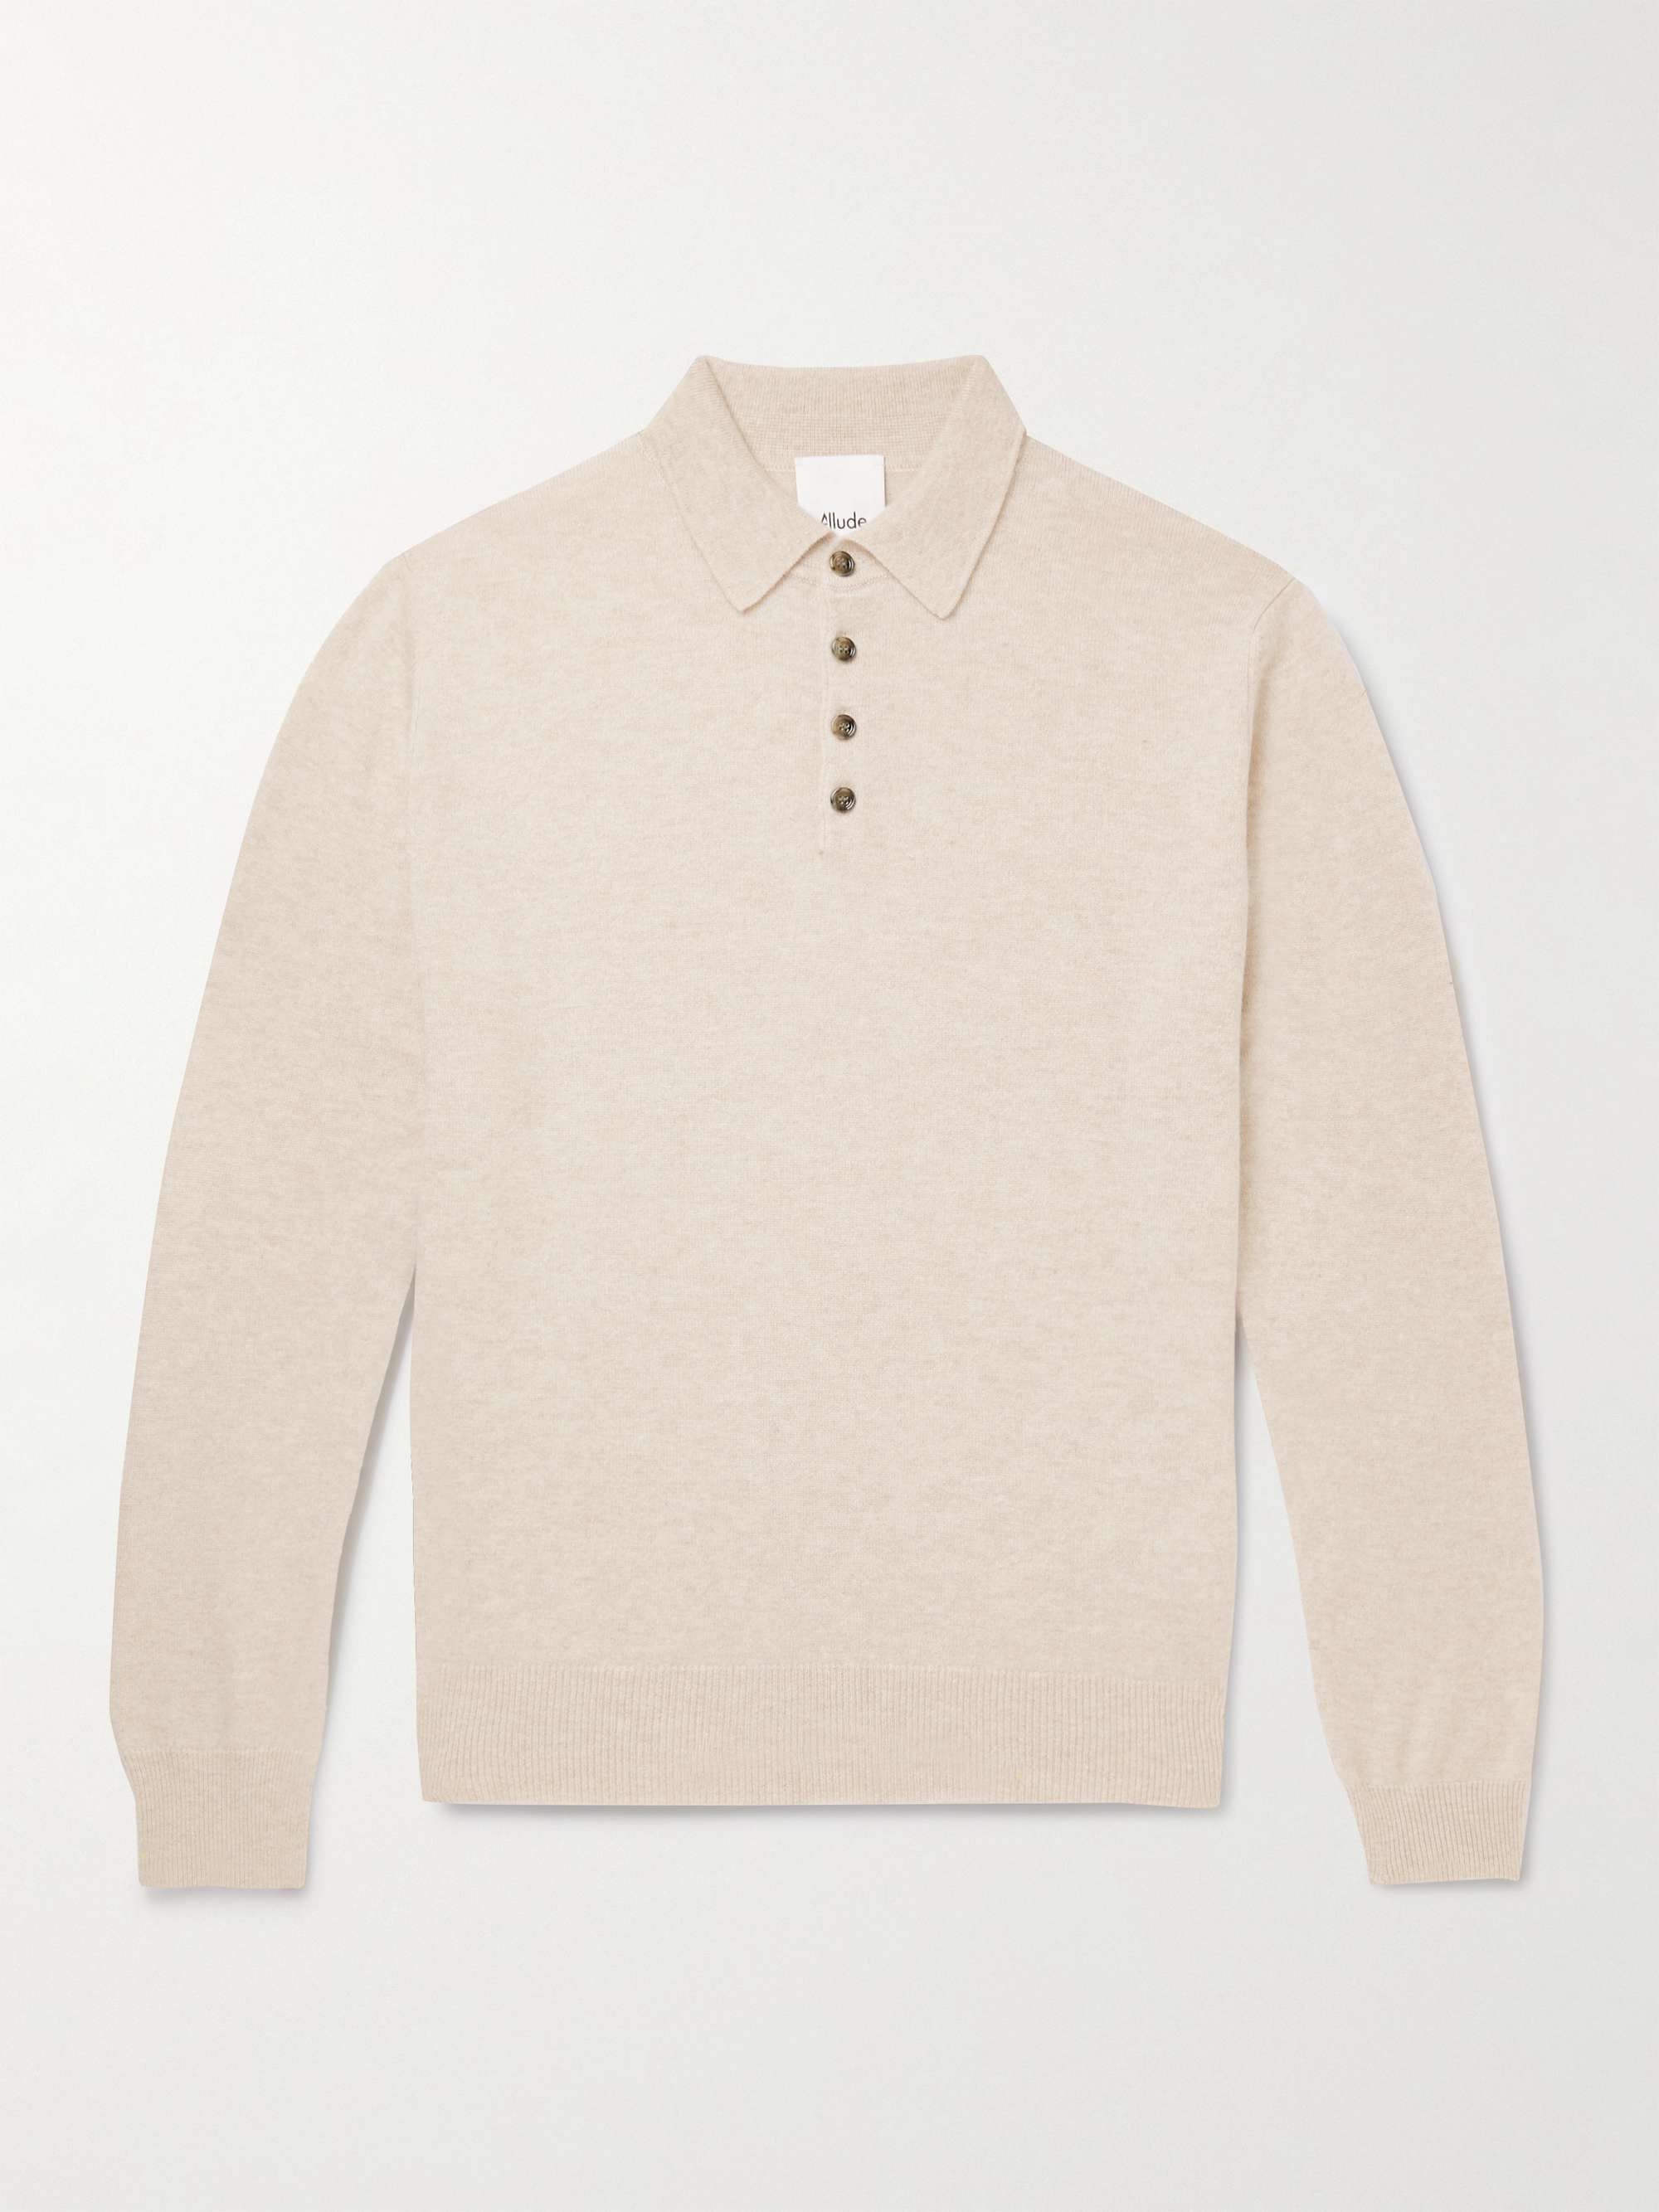 ALLUDE Cashmere Polo Shirt